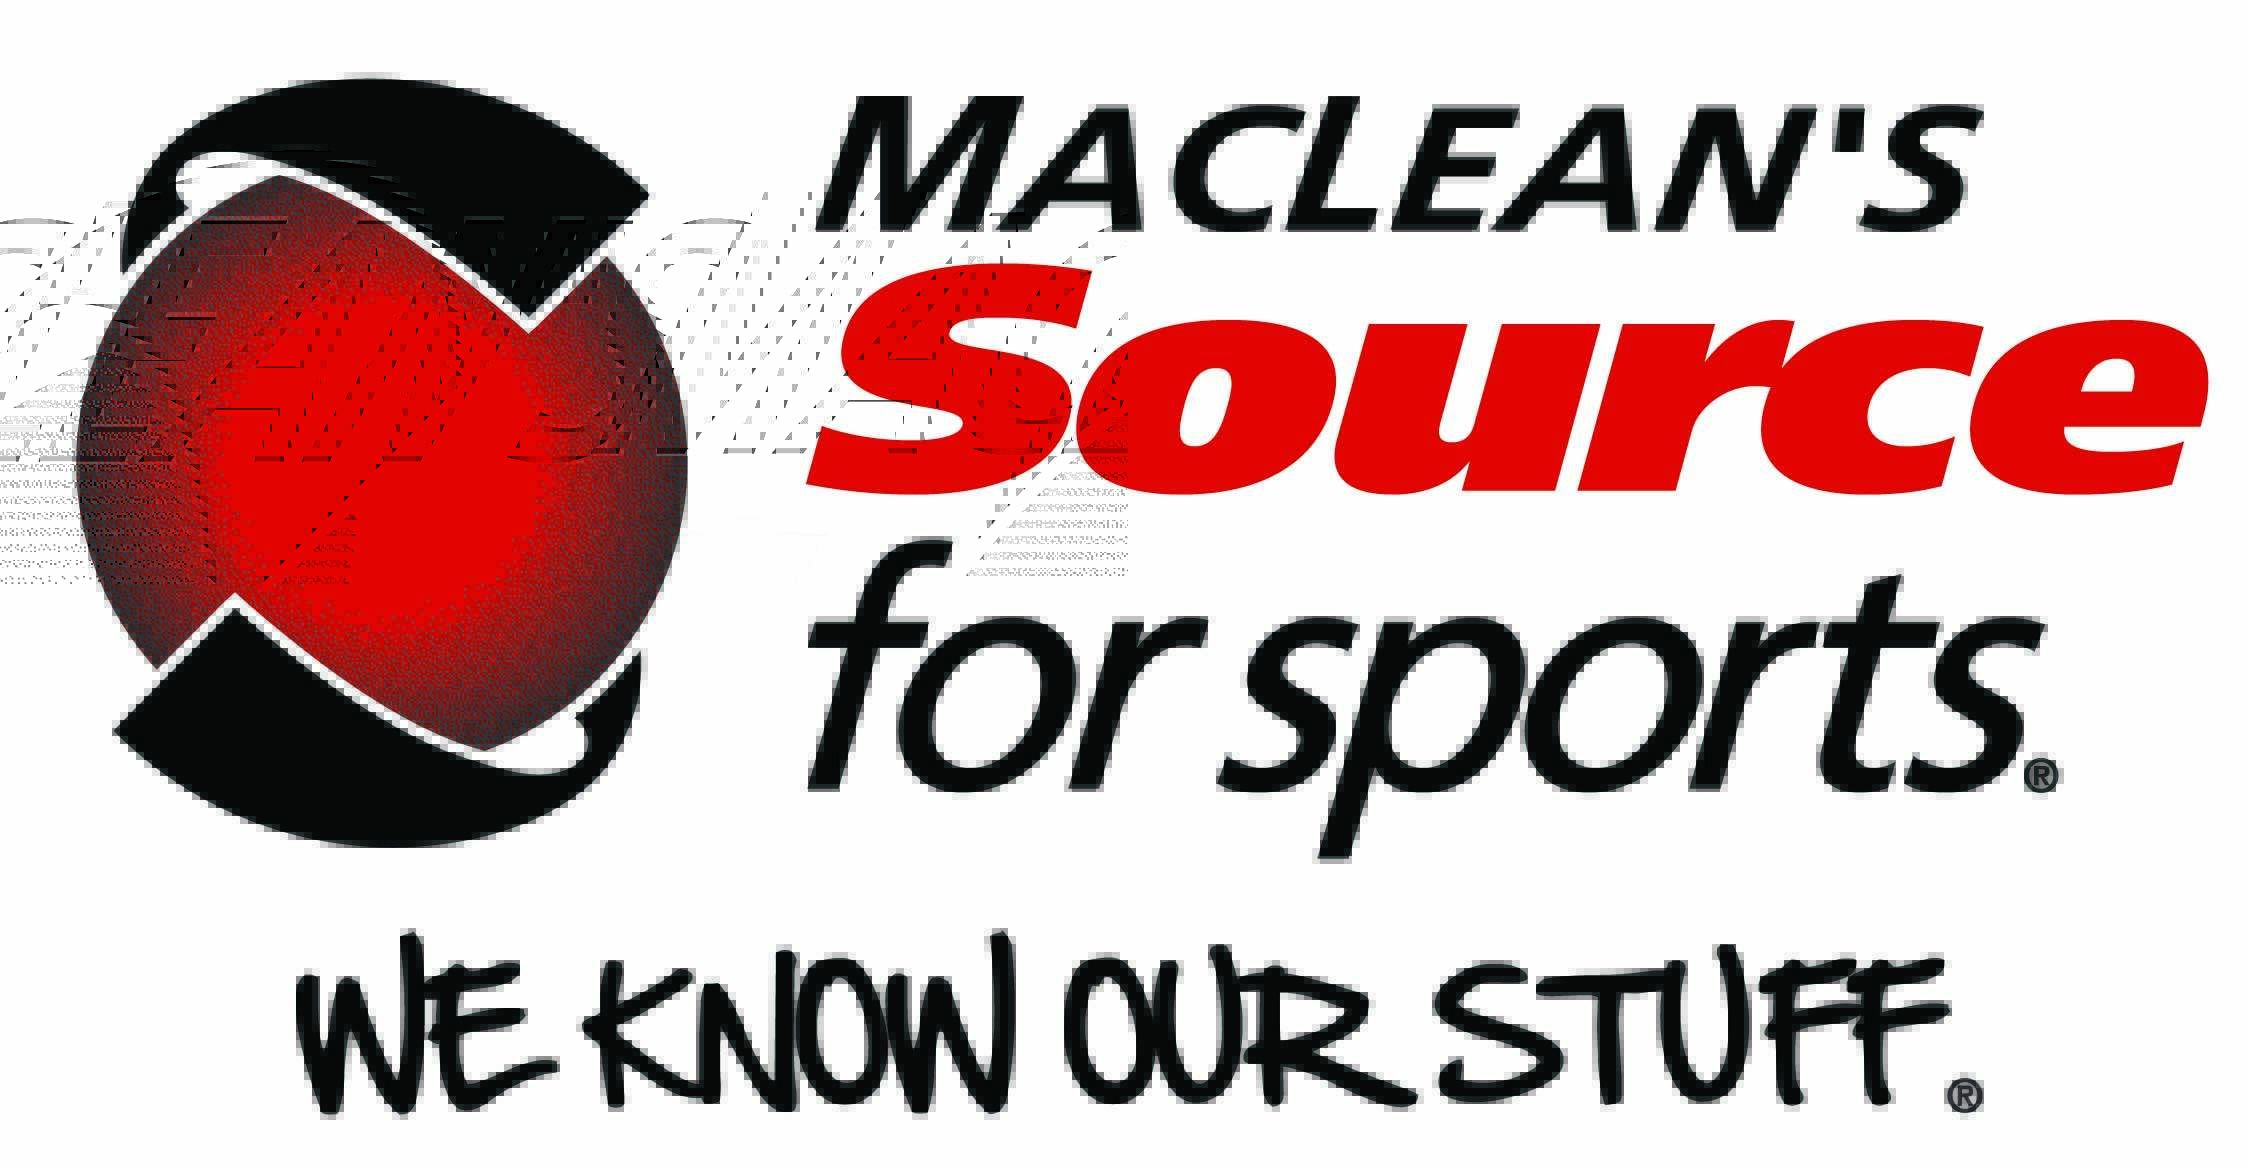 MacLean's Source for Sports